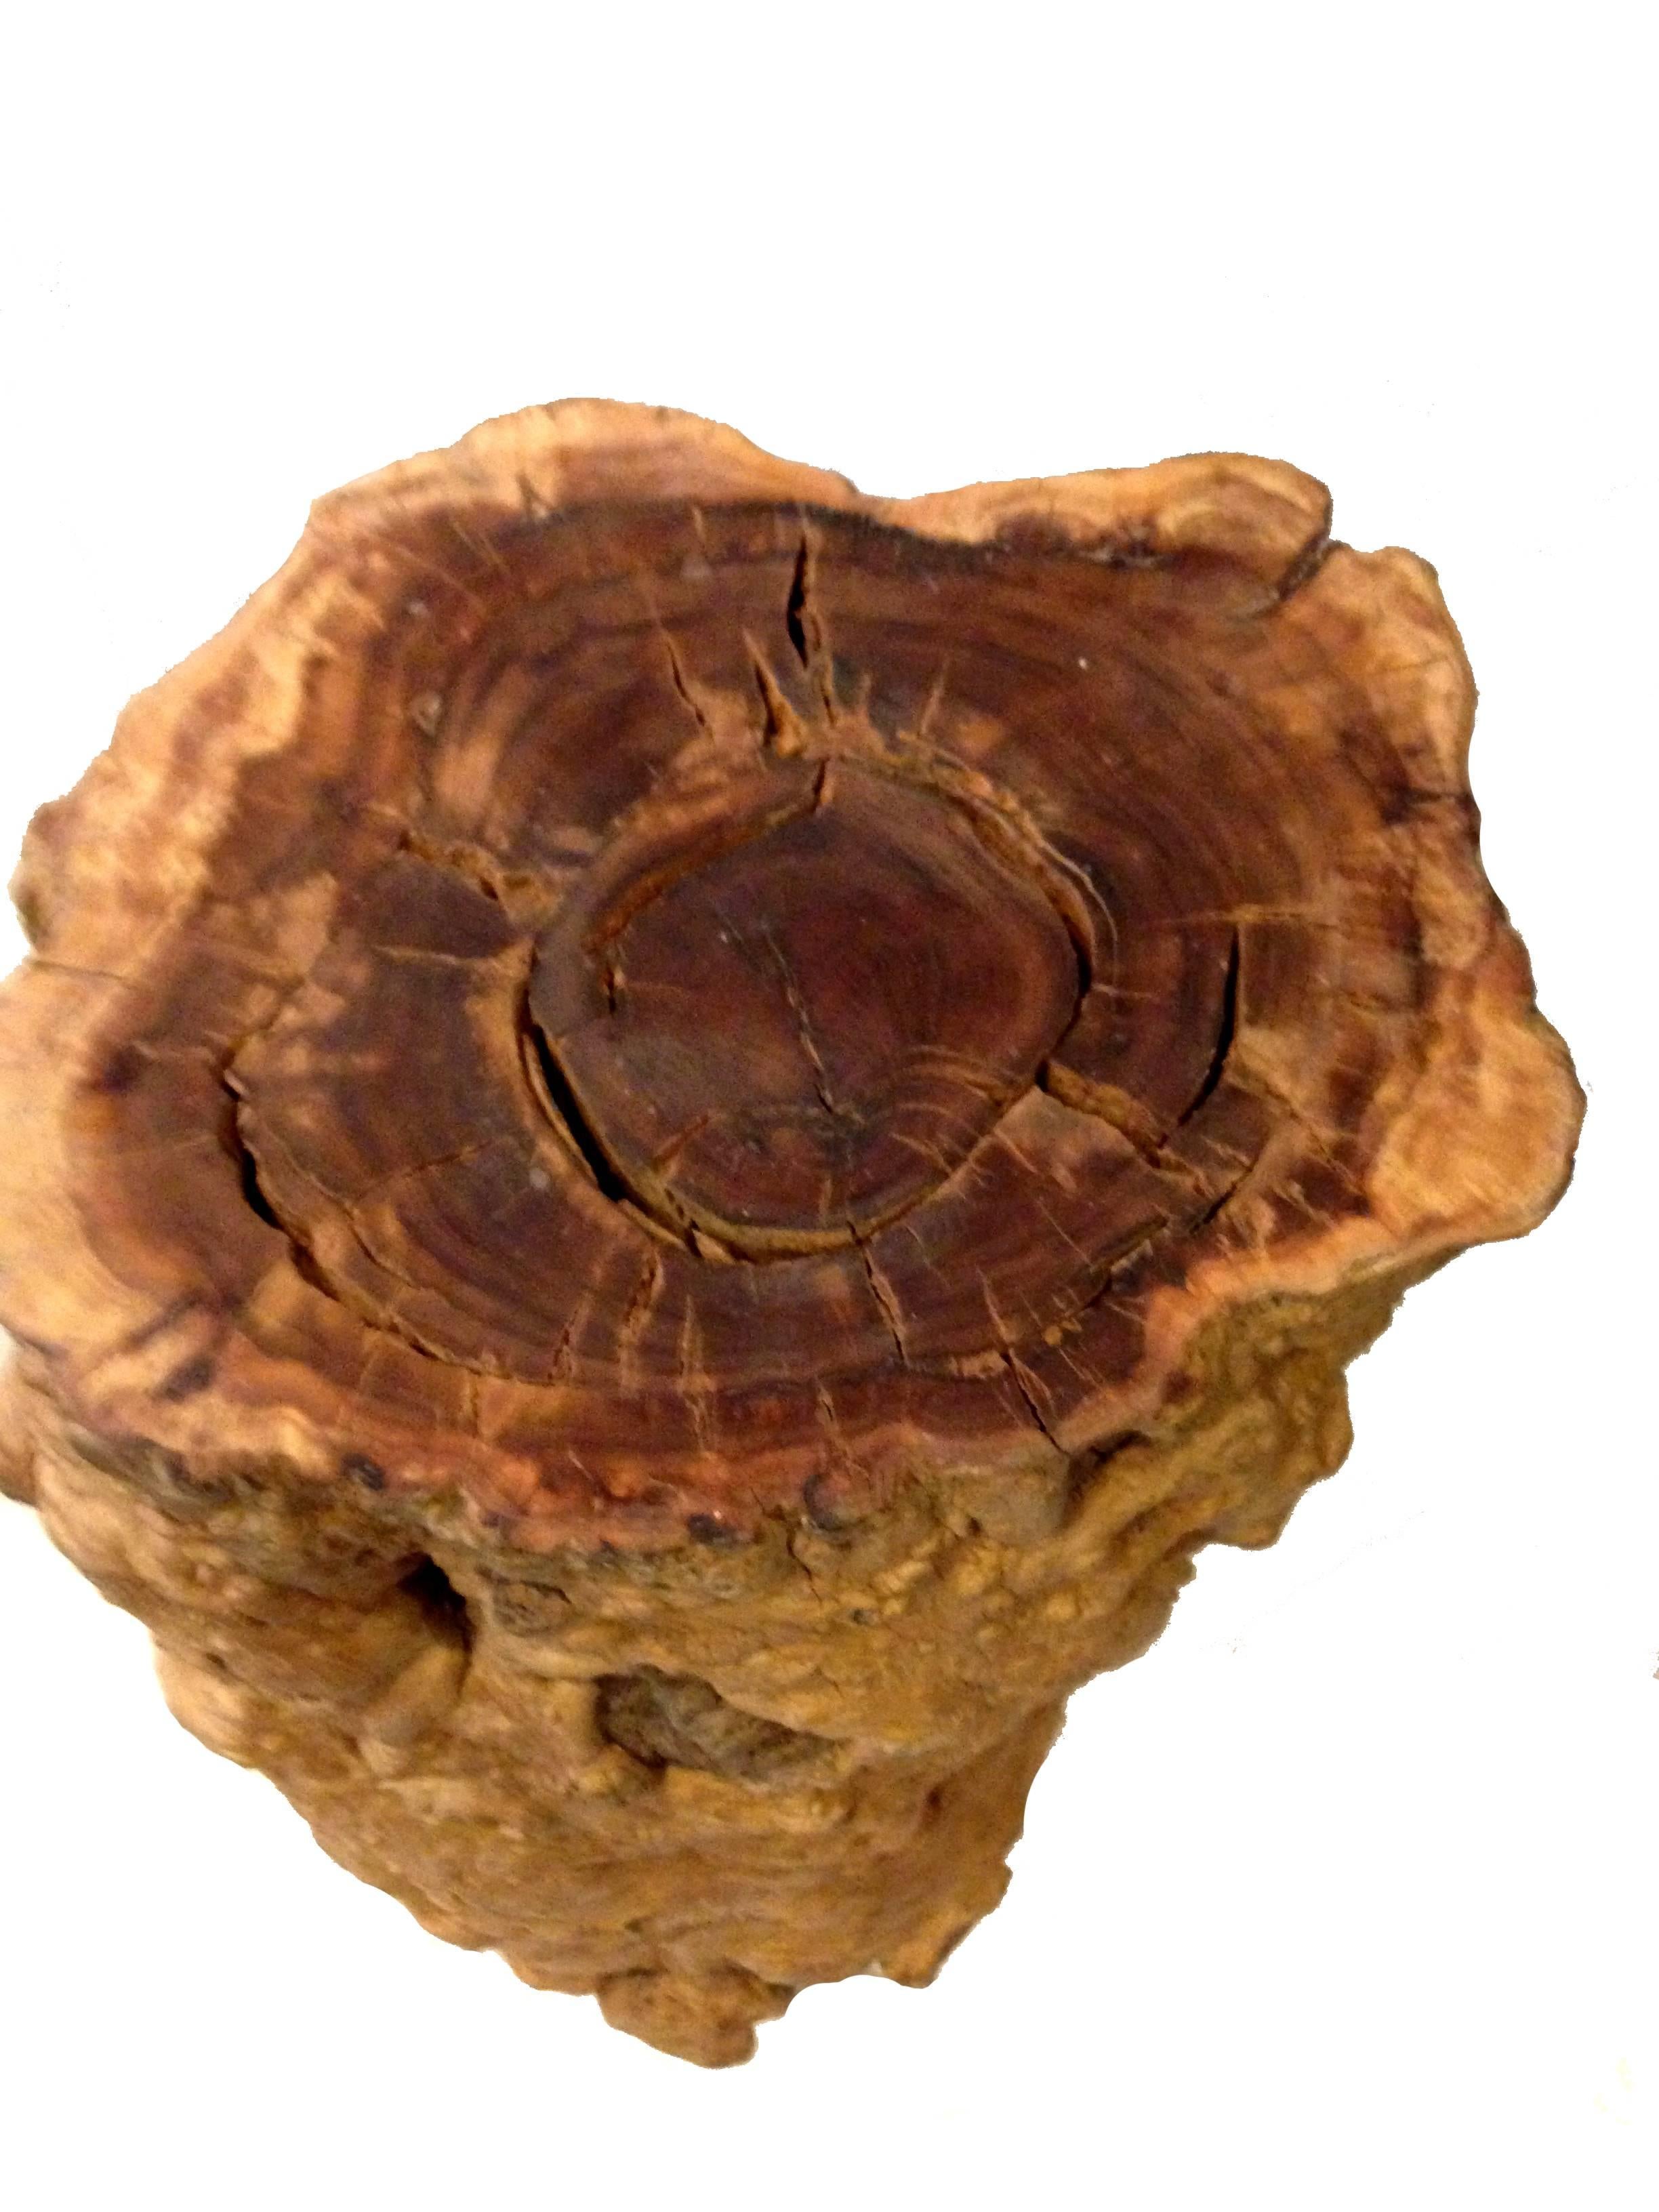 Joinery Rustic Log Country Table with Stools, Burl Jujube Solid Wood Table Set of Four